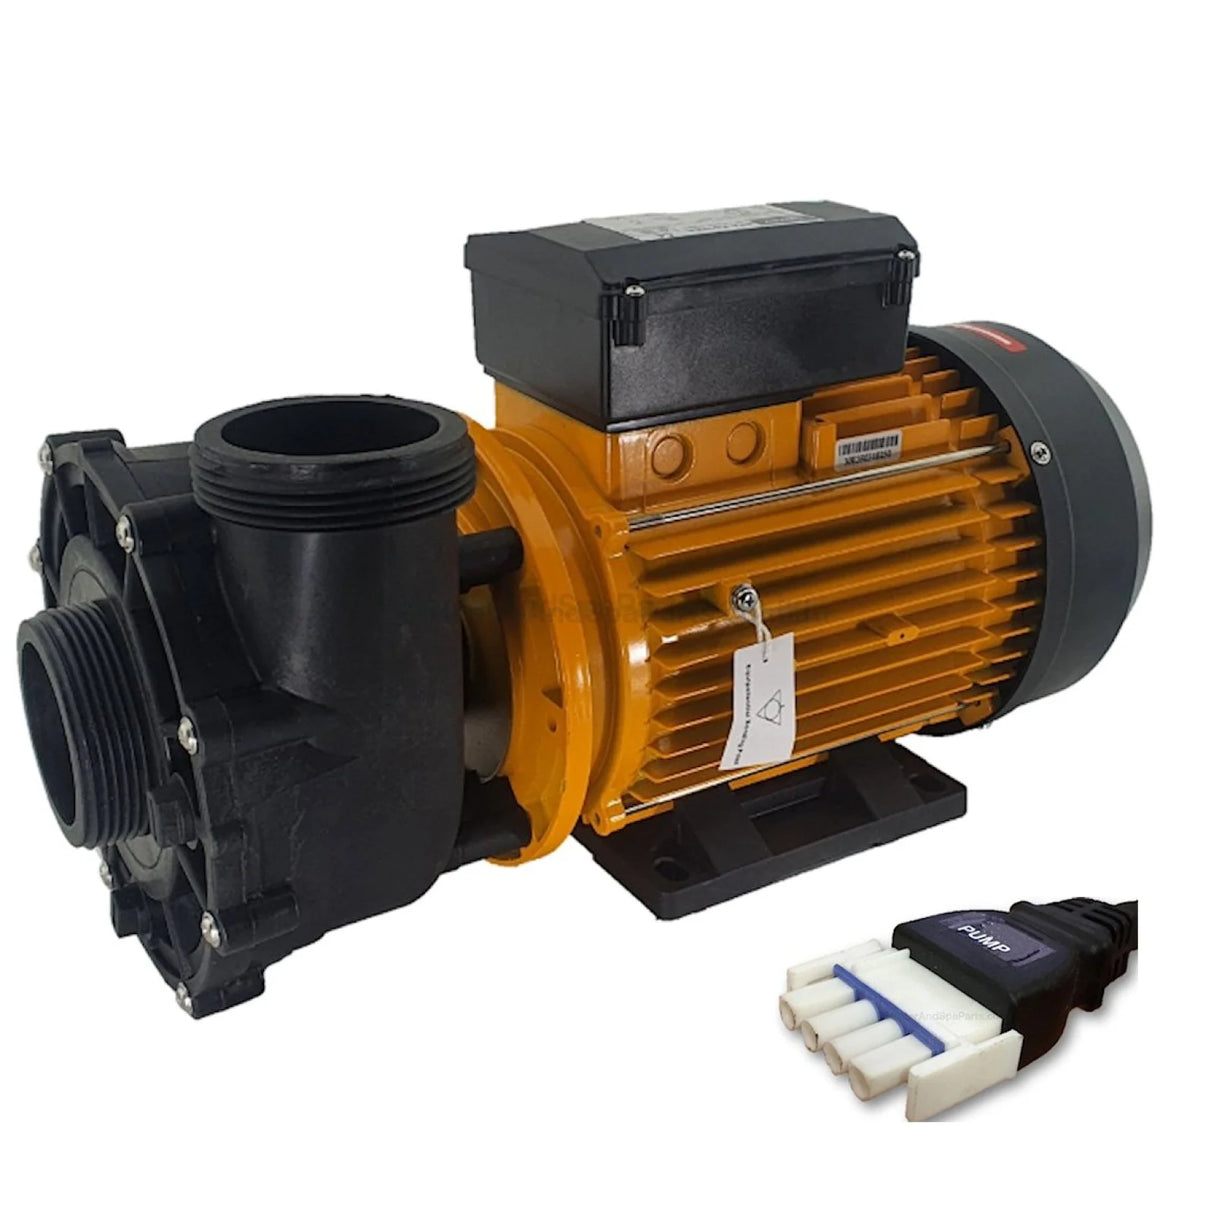 2.0Hp 2-Speed - Davey Spaquip Qb2002 Spa Jet Booster Pump 50Mm Overmoulded Amp Pumps